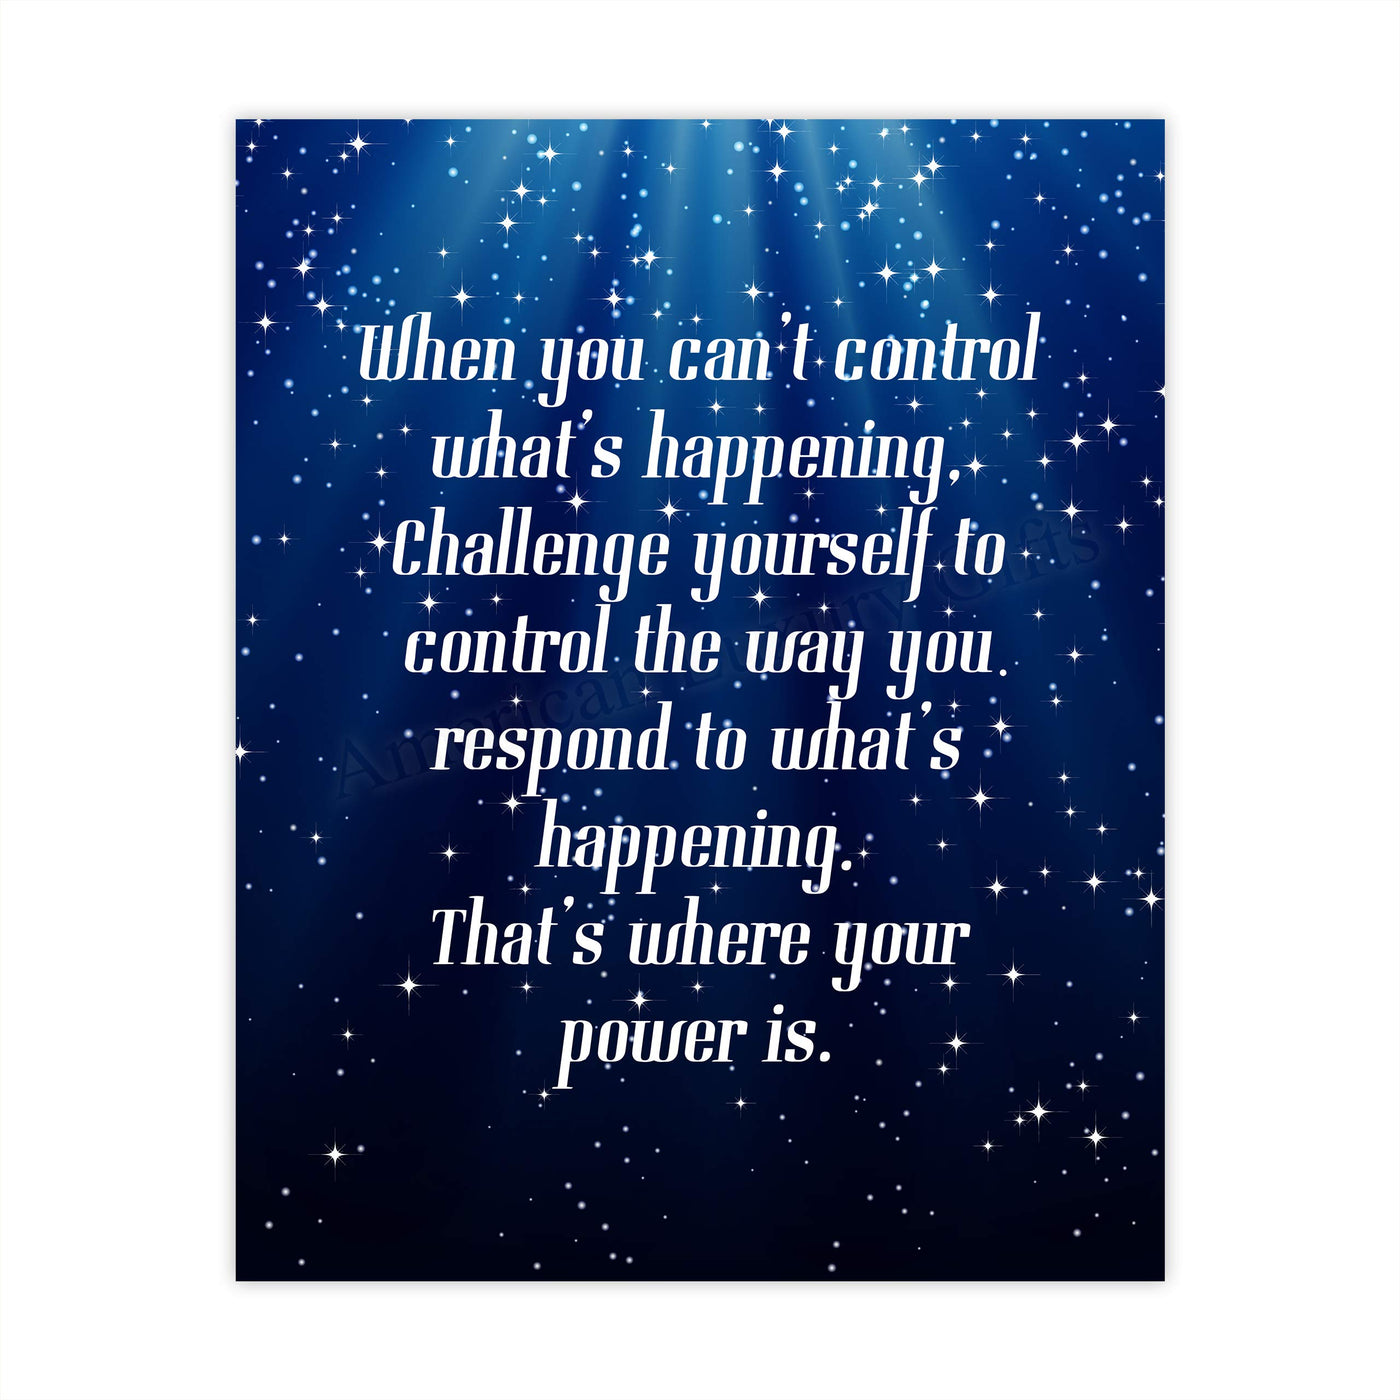 Control the Way You Respond-That's Where Power Is Motivational Quotes Wall Art -8 x 10" Starry Night Poster Print-Ready to Frame. Perfect Home-Studio-Office-Zen Decor. Great Classroom Sign!